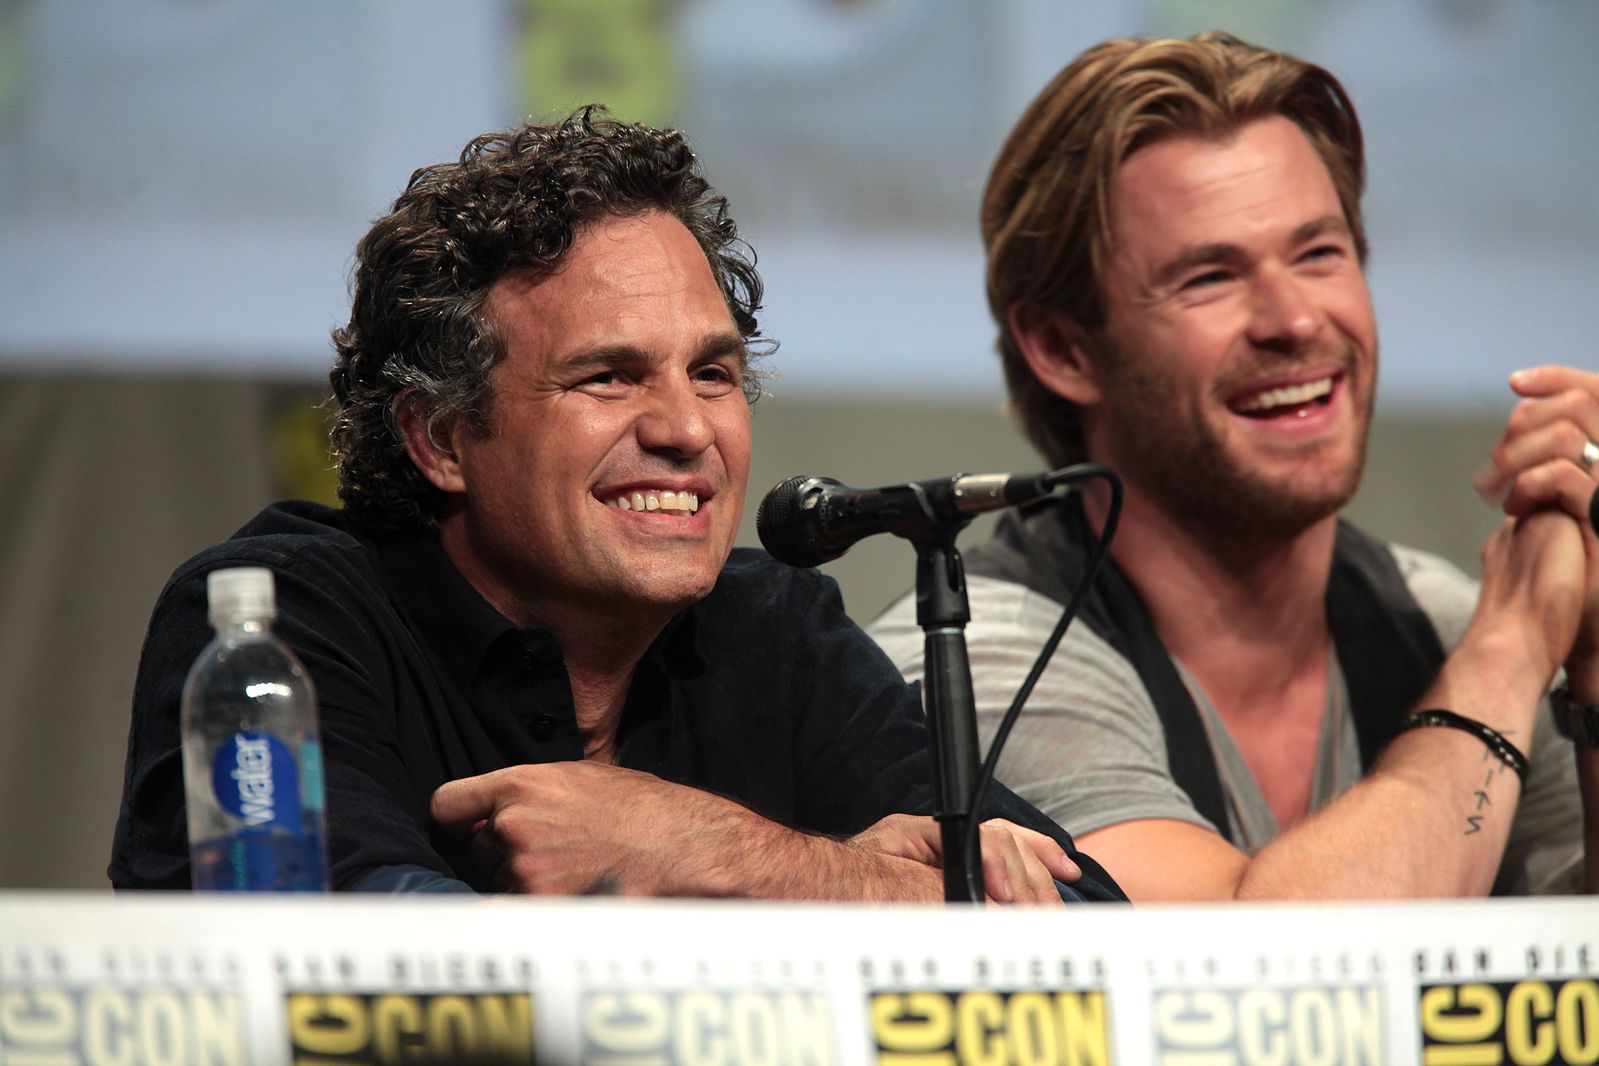 Sticking up for the Marvel Man: Ruffalo & Hemsworth at Comic Con / Photo: Gage Skidmore - Creative Commons